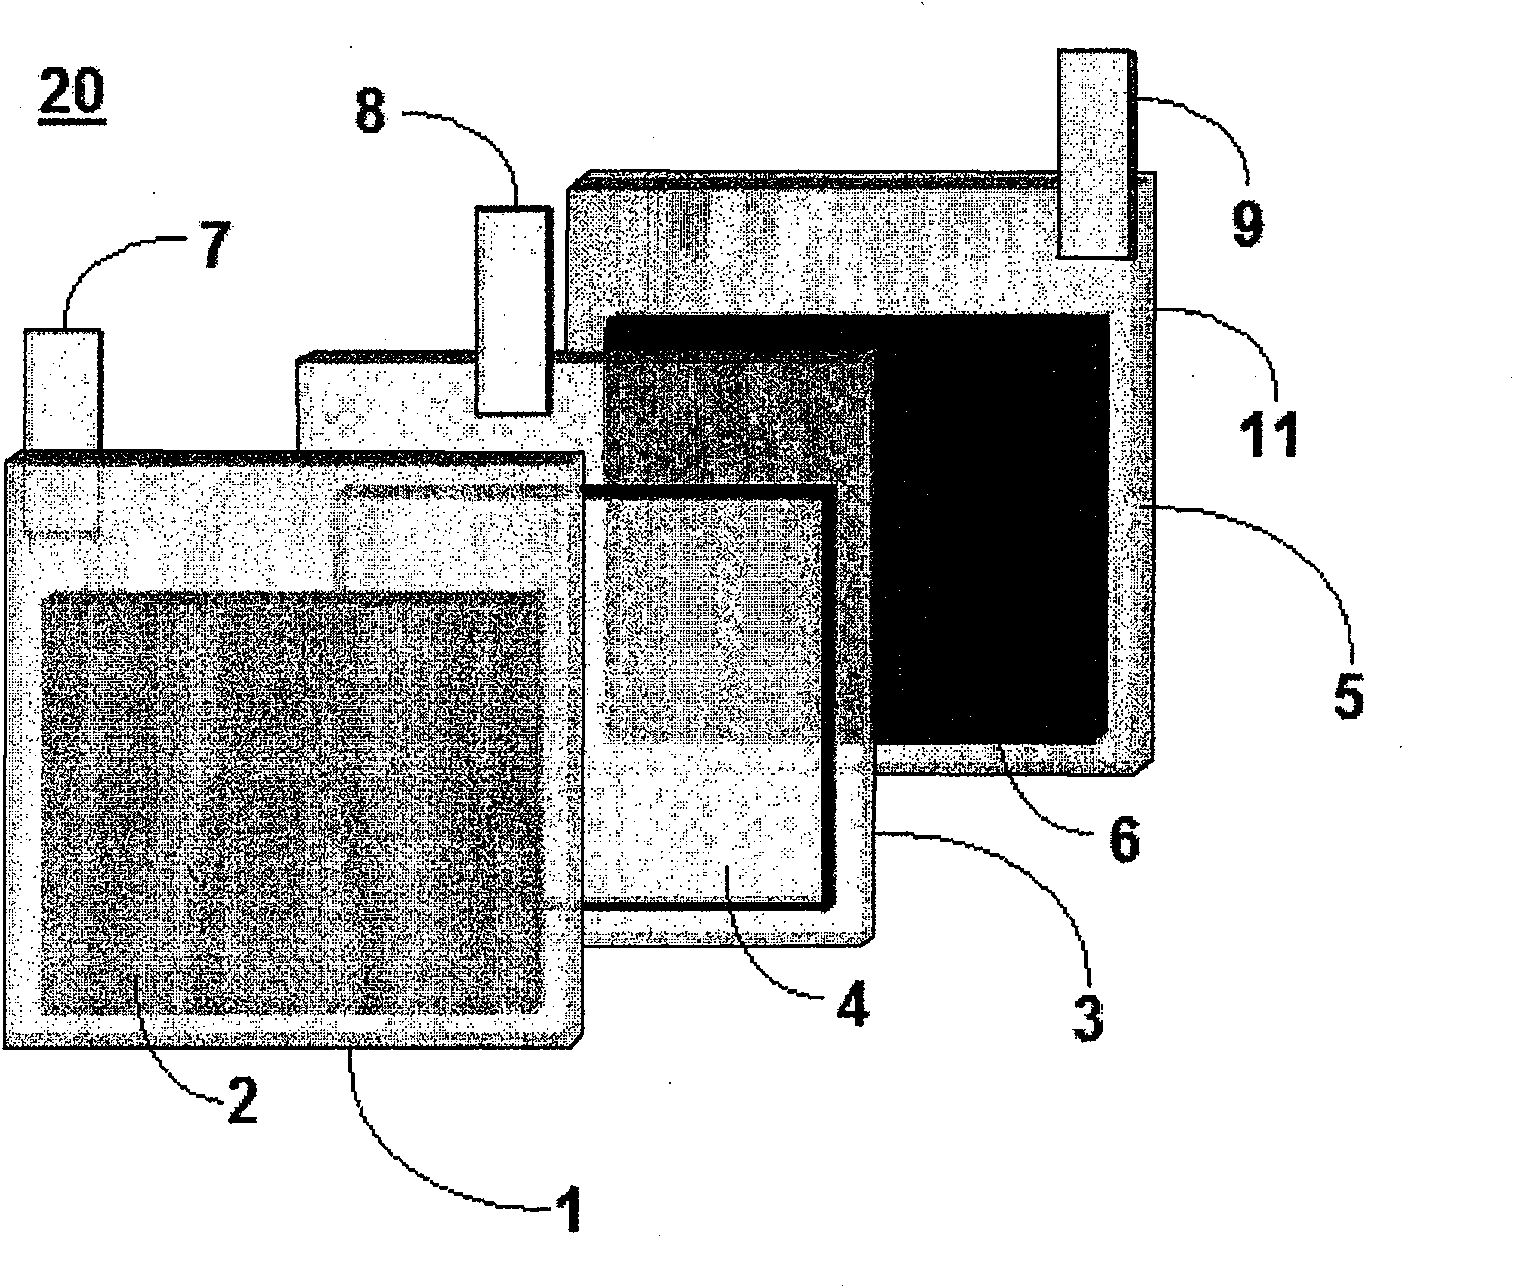 Dual active film electrochromic display device